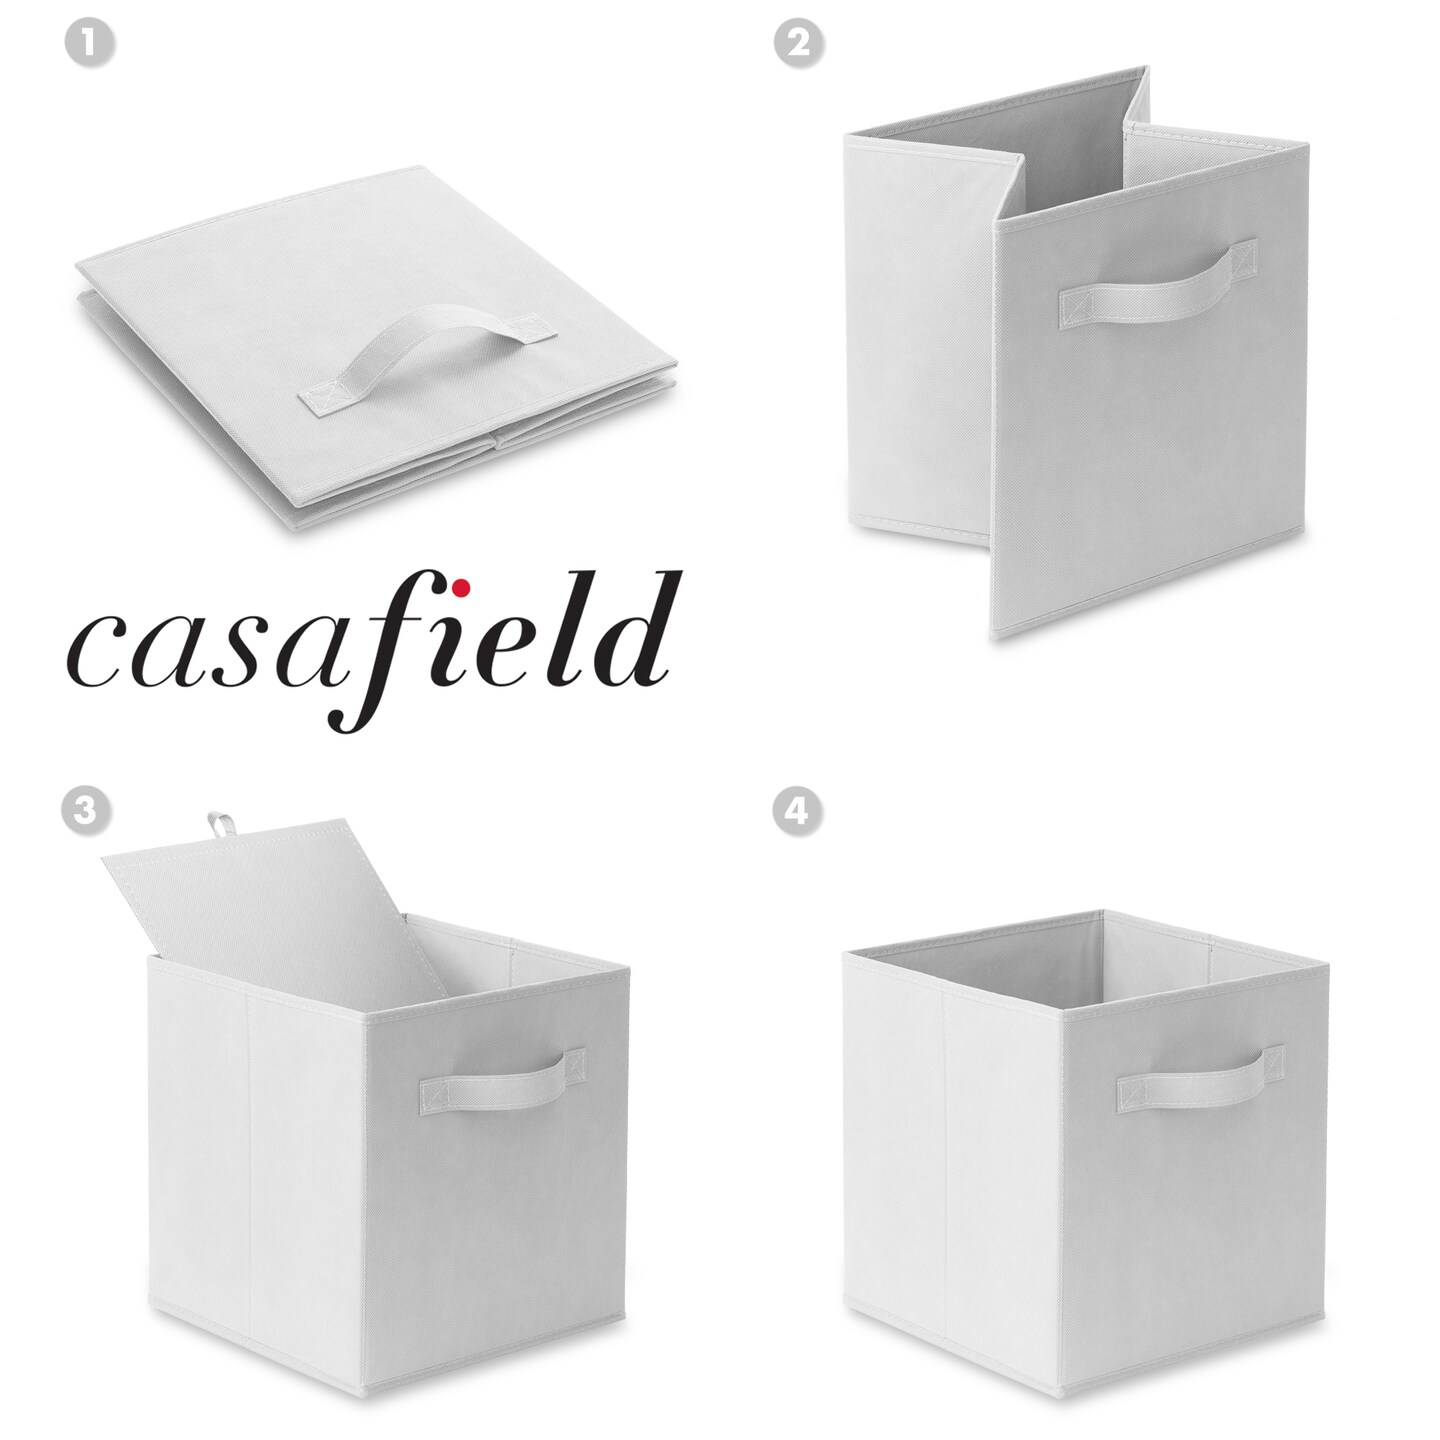 Casafield Set Of 6 Collapsible Fabric Storage Cube Bins, White